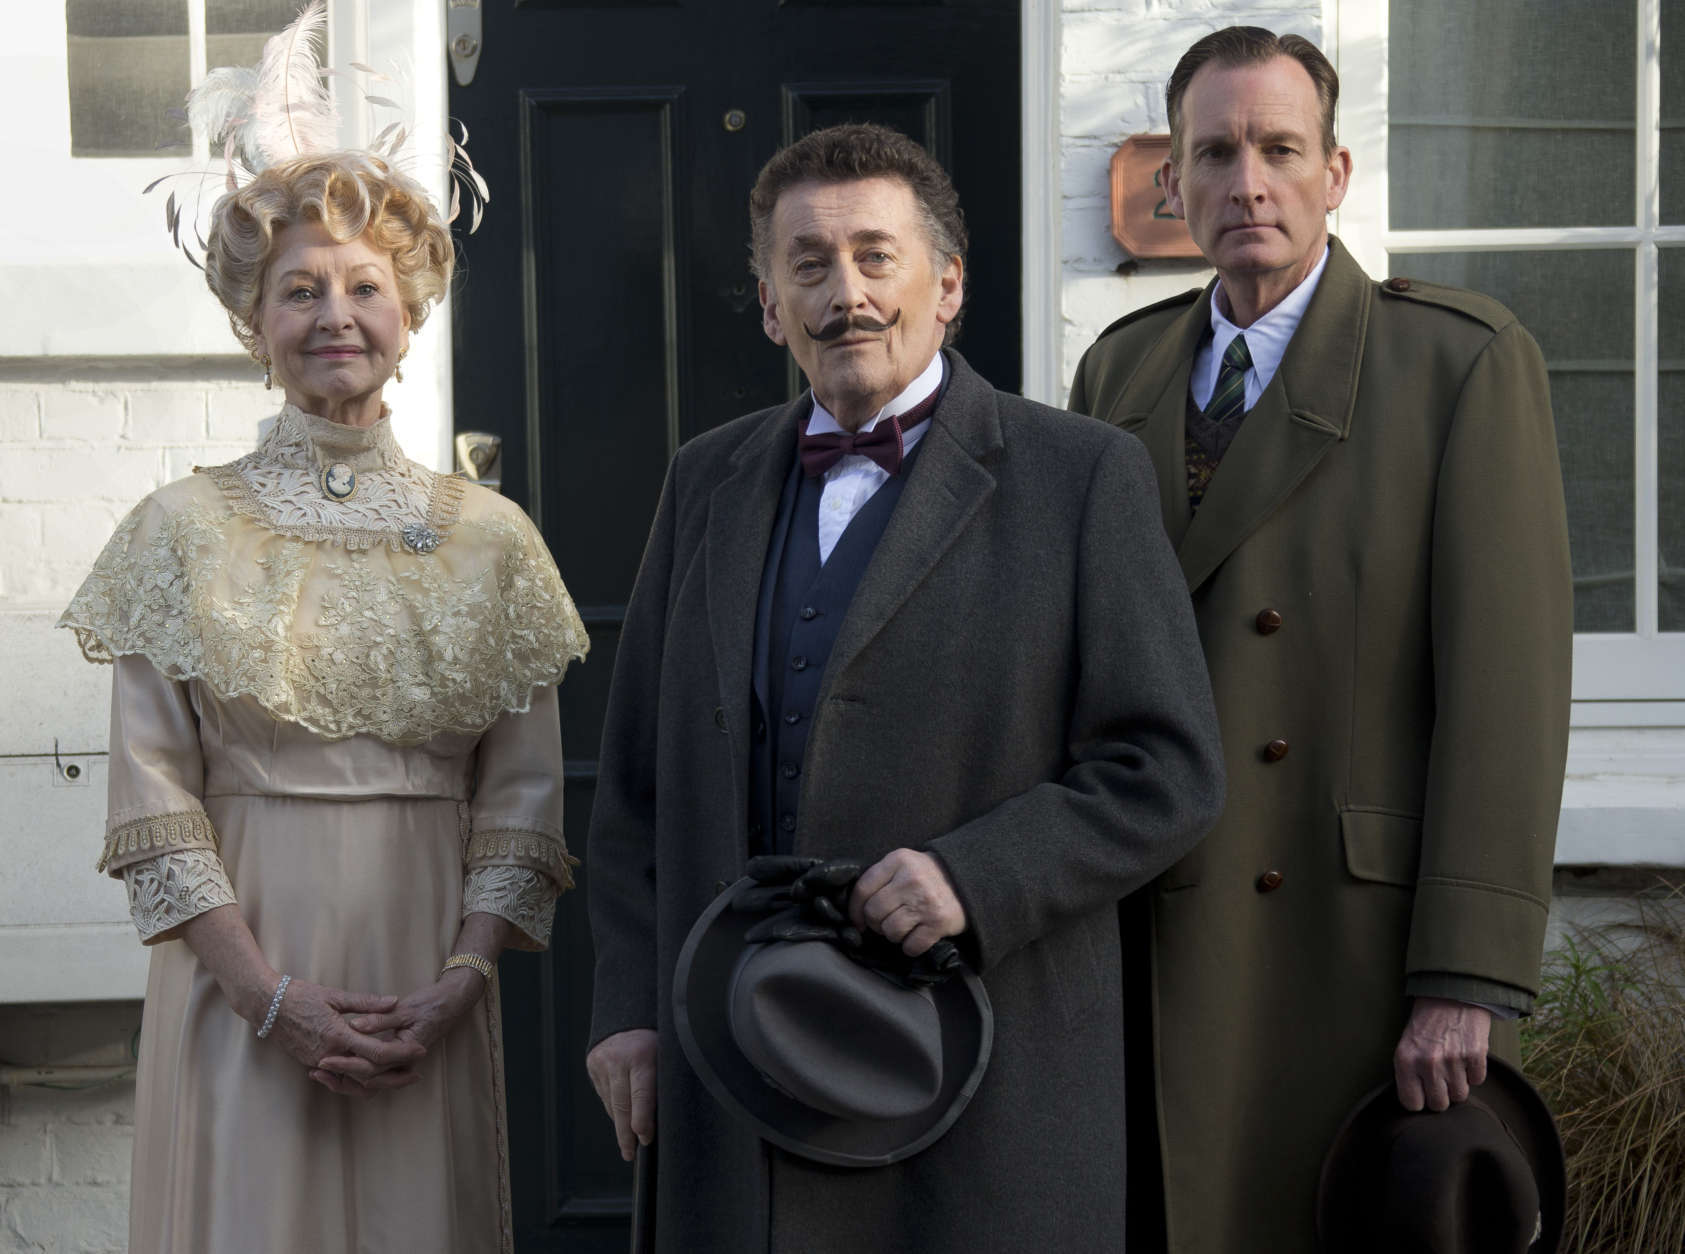 British actor Robert Powell, centre, dressed as the character Poirot, poses at a photo call for Agatha Christie's first ever play, Black Coffee. Alongside Powell are actors Liza Goddard, as Miss Caroline Amory, and Robin McCallum, right, as Poirots friend and confidante Captain Arthur Hastings. The photo call took place outside the former west London residence of author Christie, in Cresswell Place, London, Friday, Jan. 10, 2014. (Photo by Joel Ryan/Invision/AP)